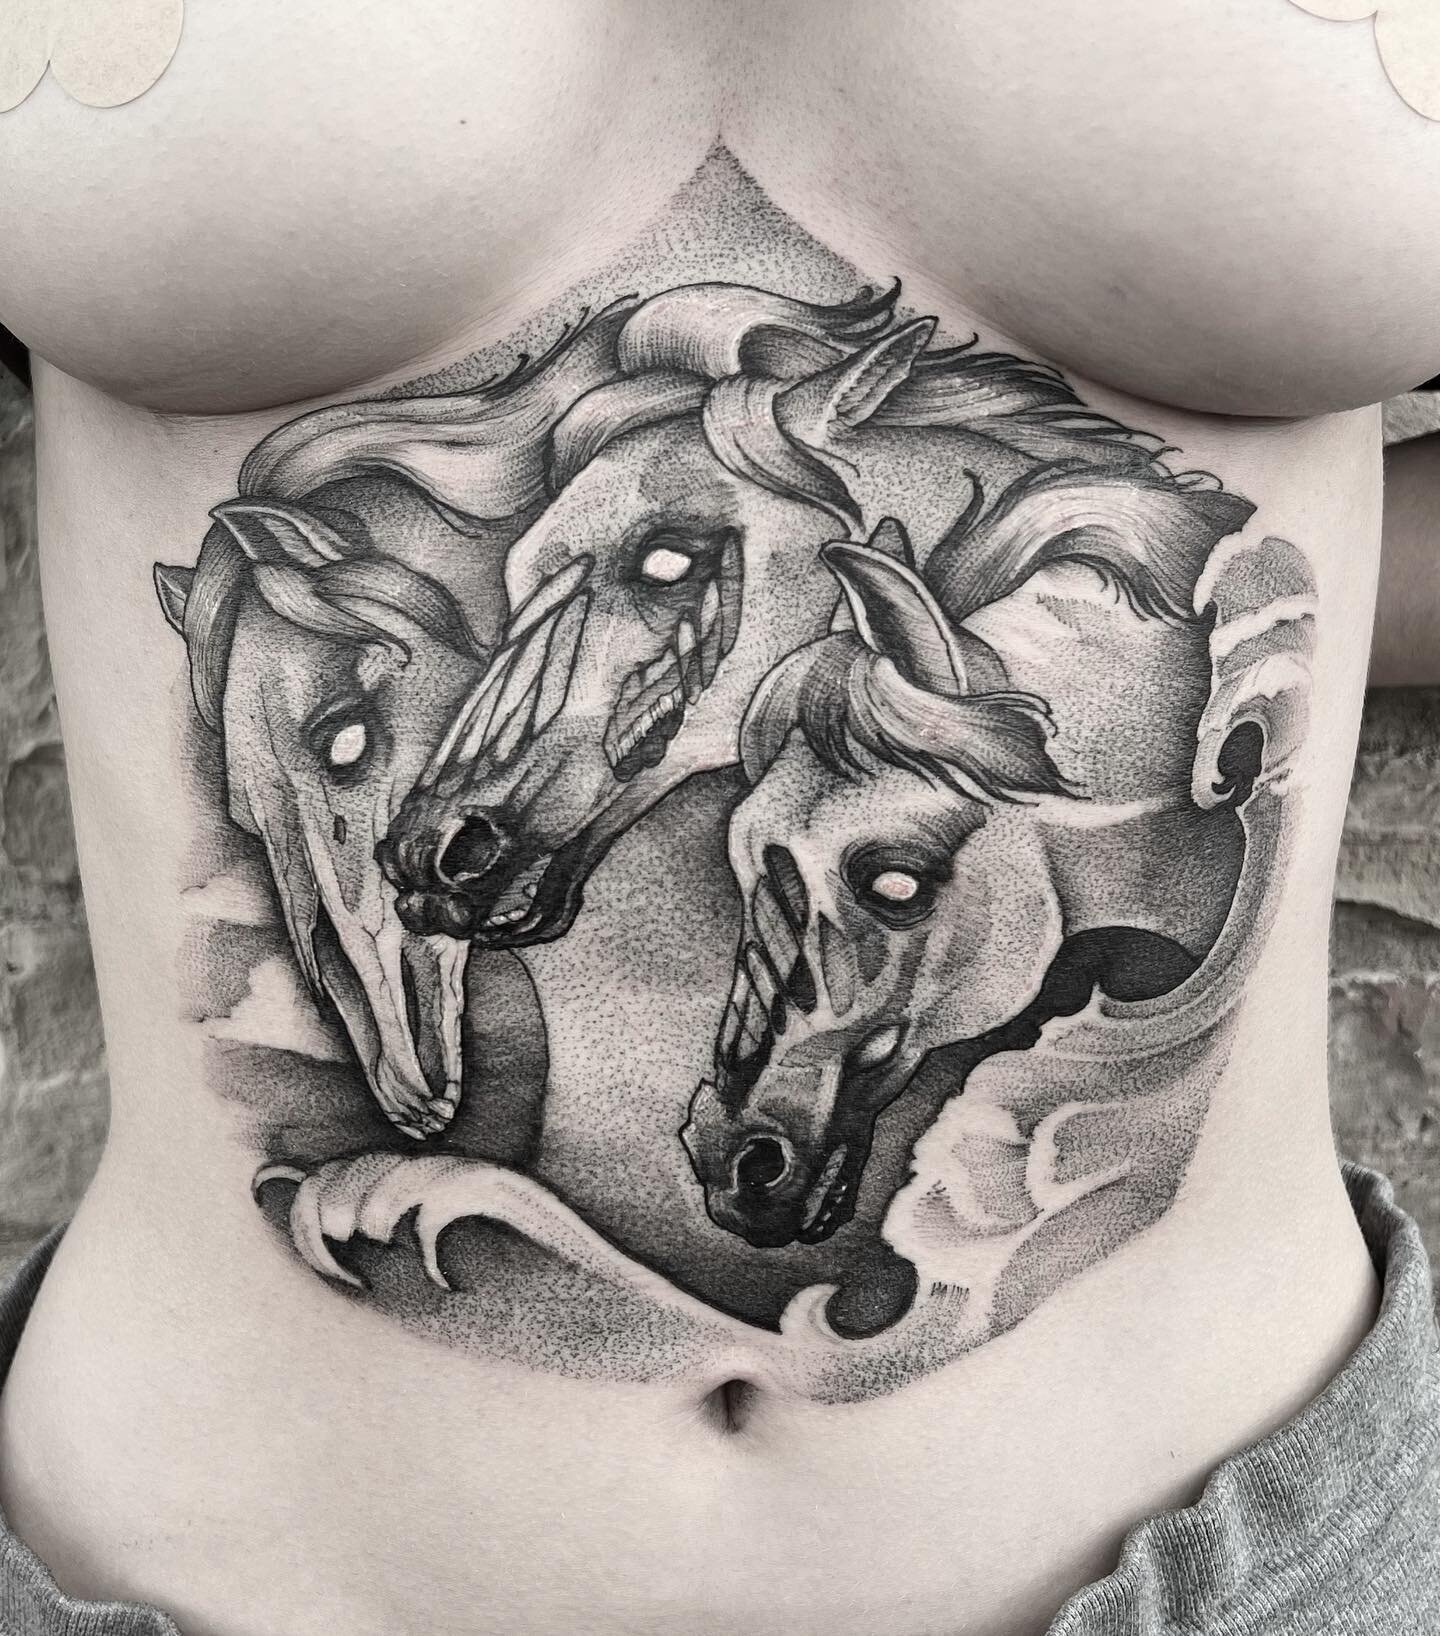 Pharaoh&rsquo;s Horses from back in June ✨ Swipe for the video!
✖️ Done at @sharktooth_tattoo ✖️
.
.
.
.
@industryinks
@hivecaps 
@empireinks 
@goodguysupply 
.
.
.
.
.
.
.
.
.
.
.
.
.
.
#tattoo #tattoos #tattooartist #tattooed #tattooist #blackworke